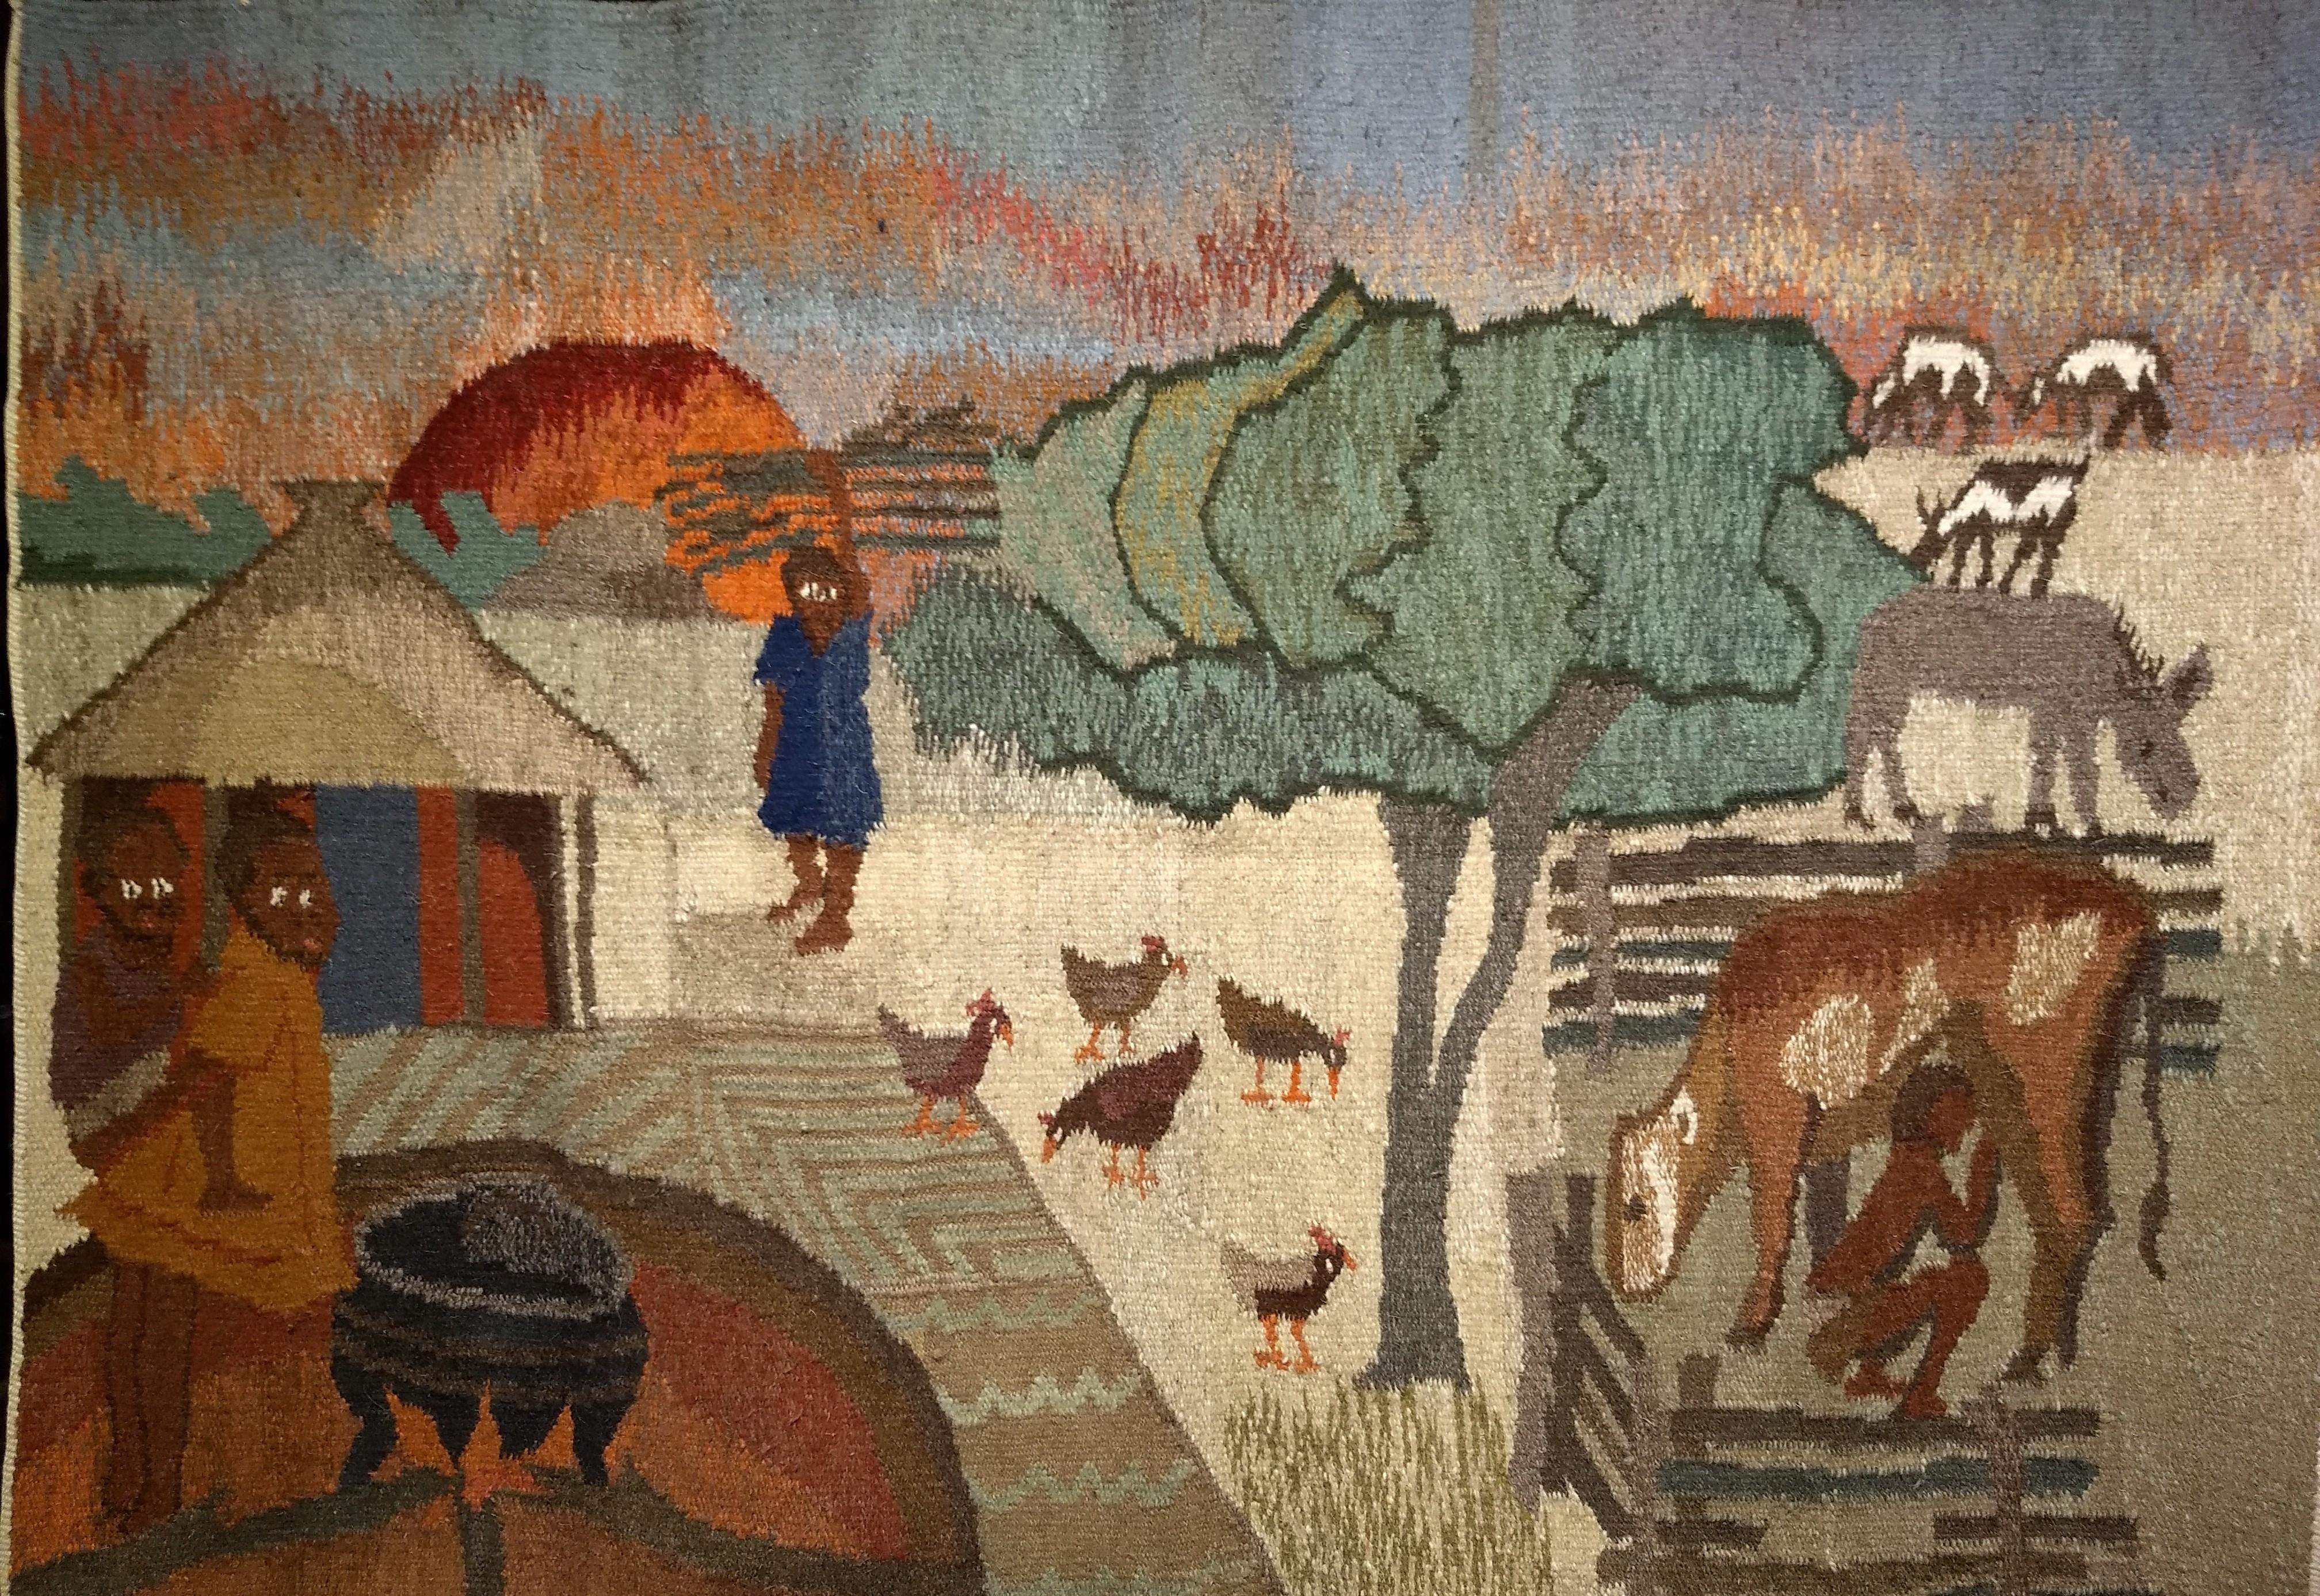 Vintage Hand Woven African Tapestry Depicting Life Scenes Around a Village For Sale 2